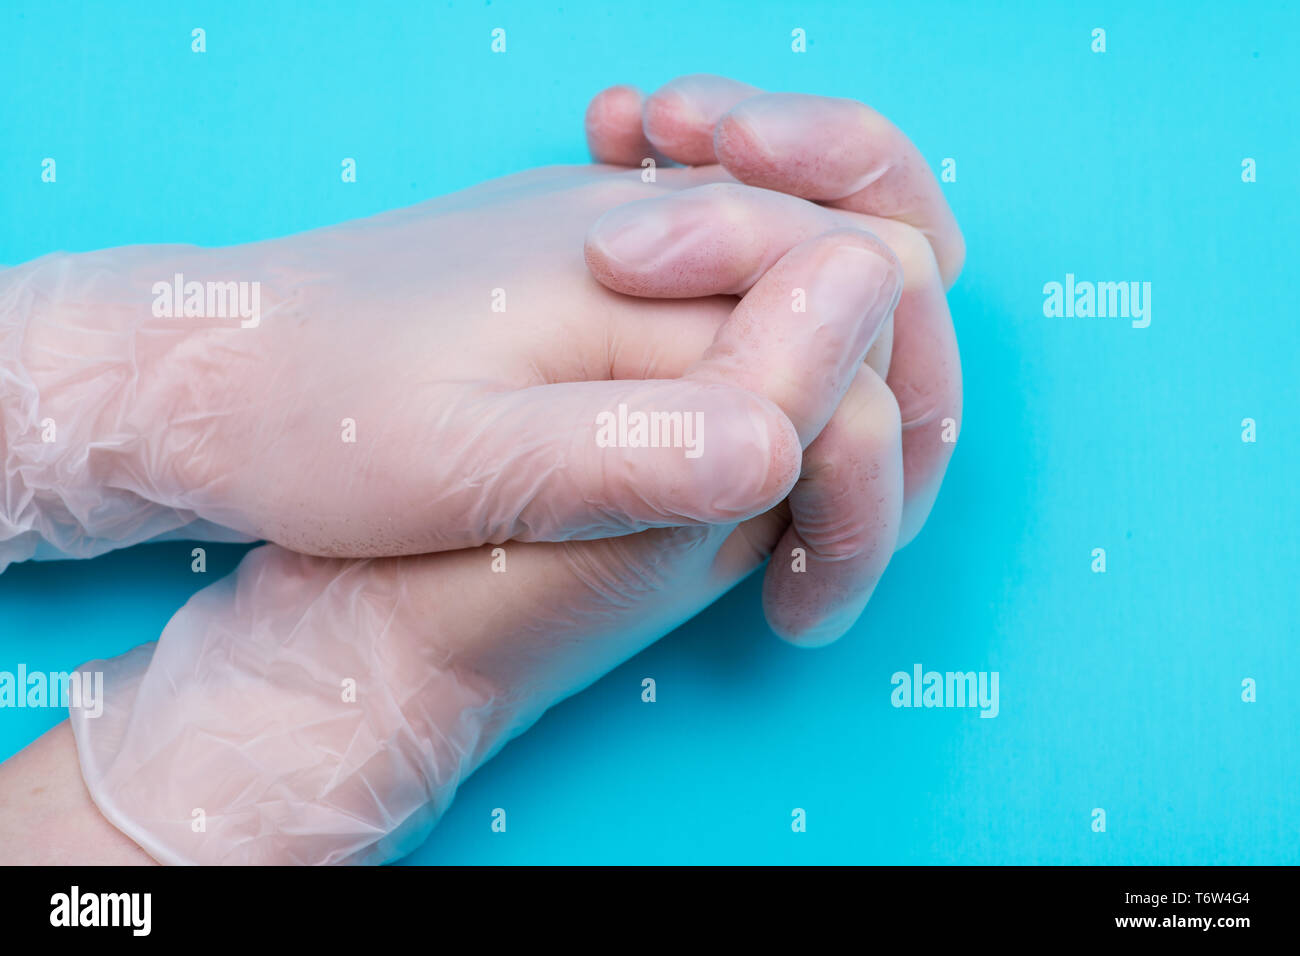 Medical Exam Quality Vinyl Gloves on colorful background. Stock Photo